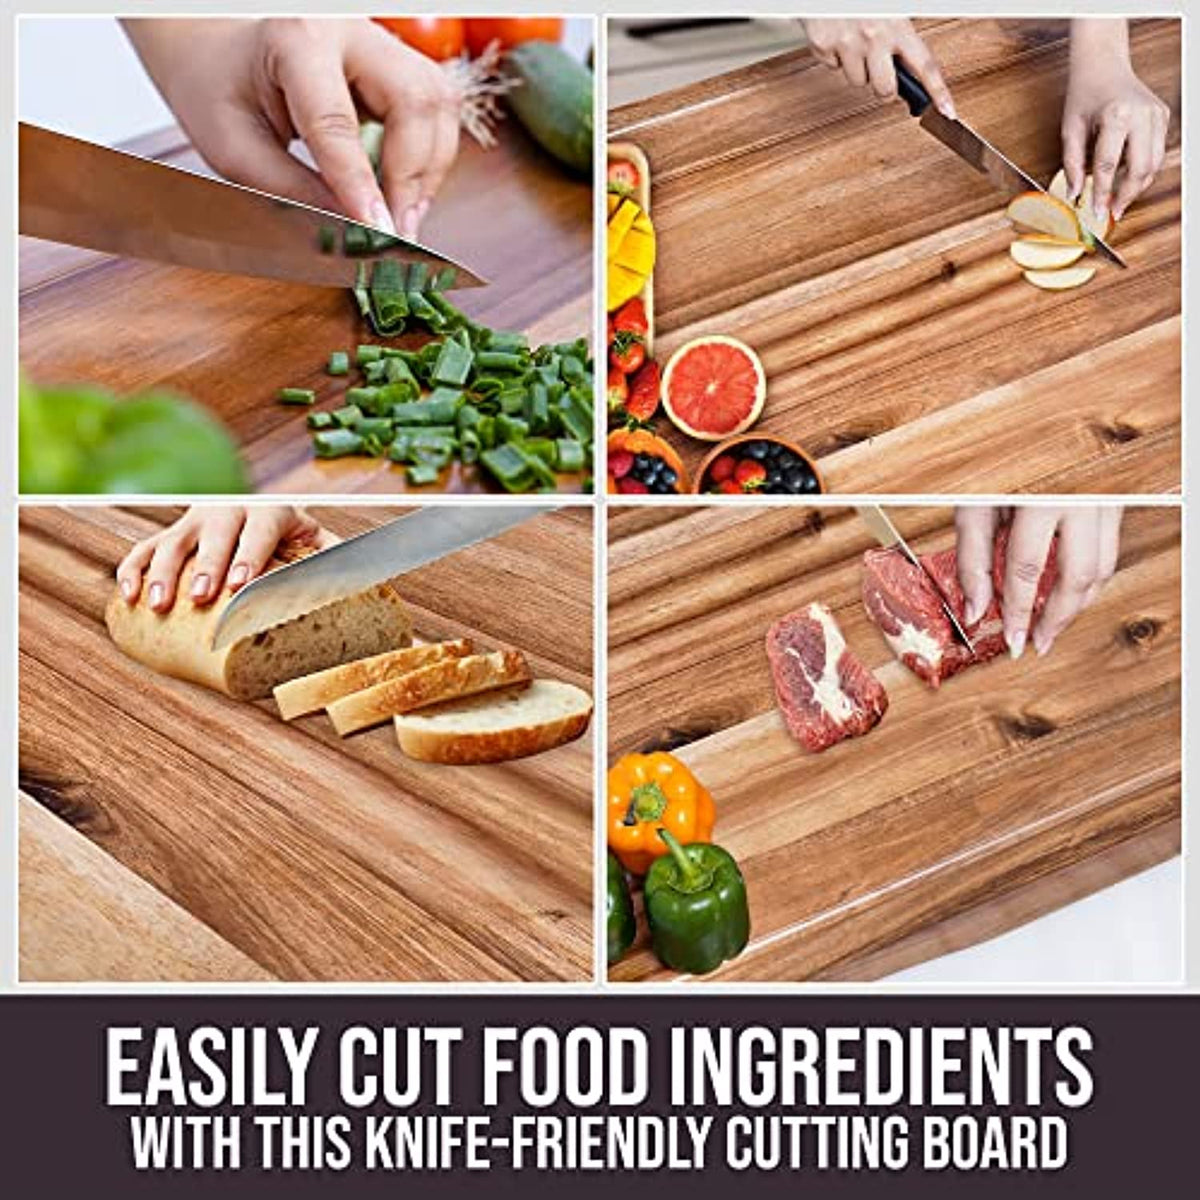 Large Maple Stove Cover Cutting Board Functional Kitchen Décor Hardwood  Noodle Board for Adding Space & Entertaining 